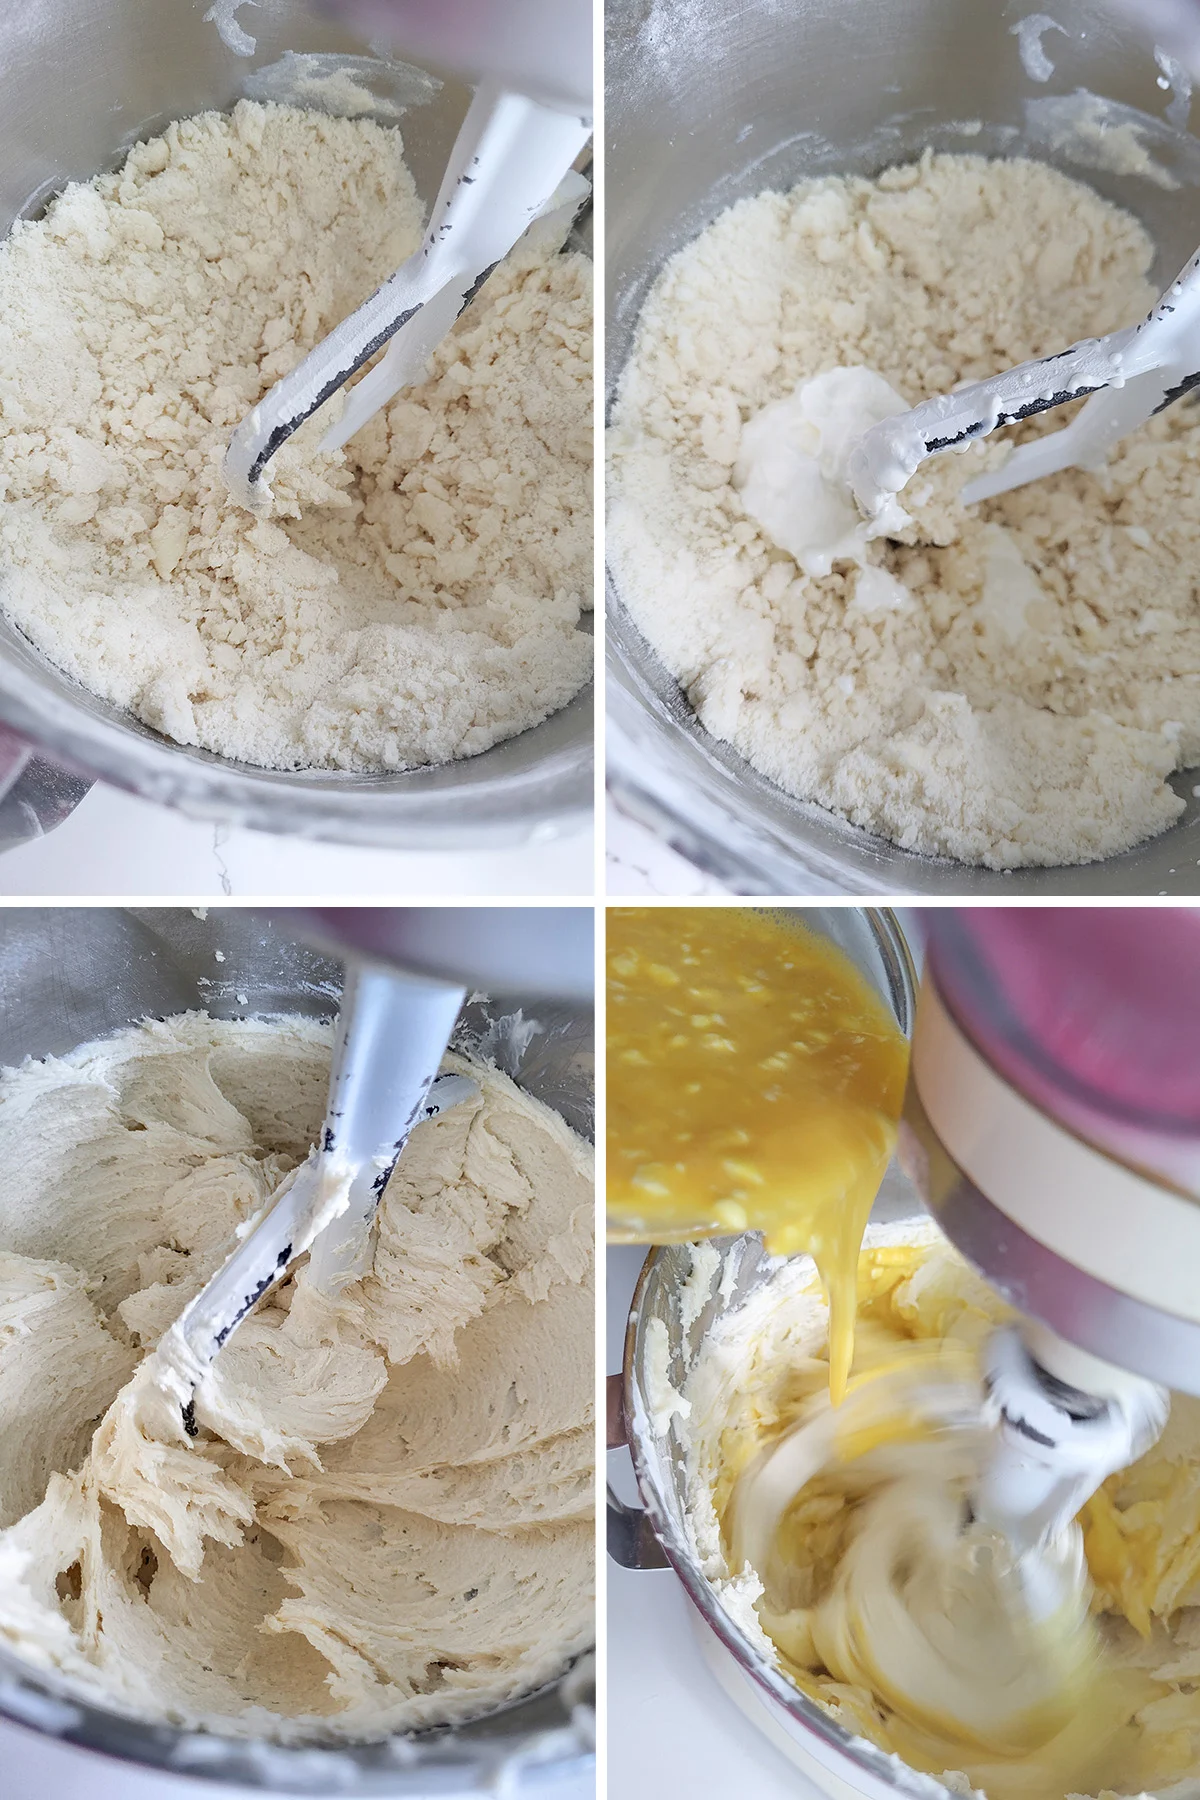 Four stages of reverse creaming cake batter. 